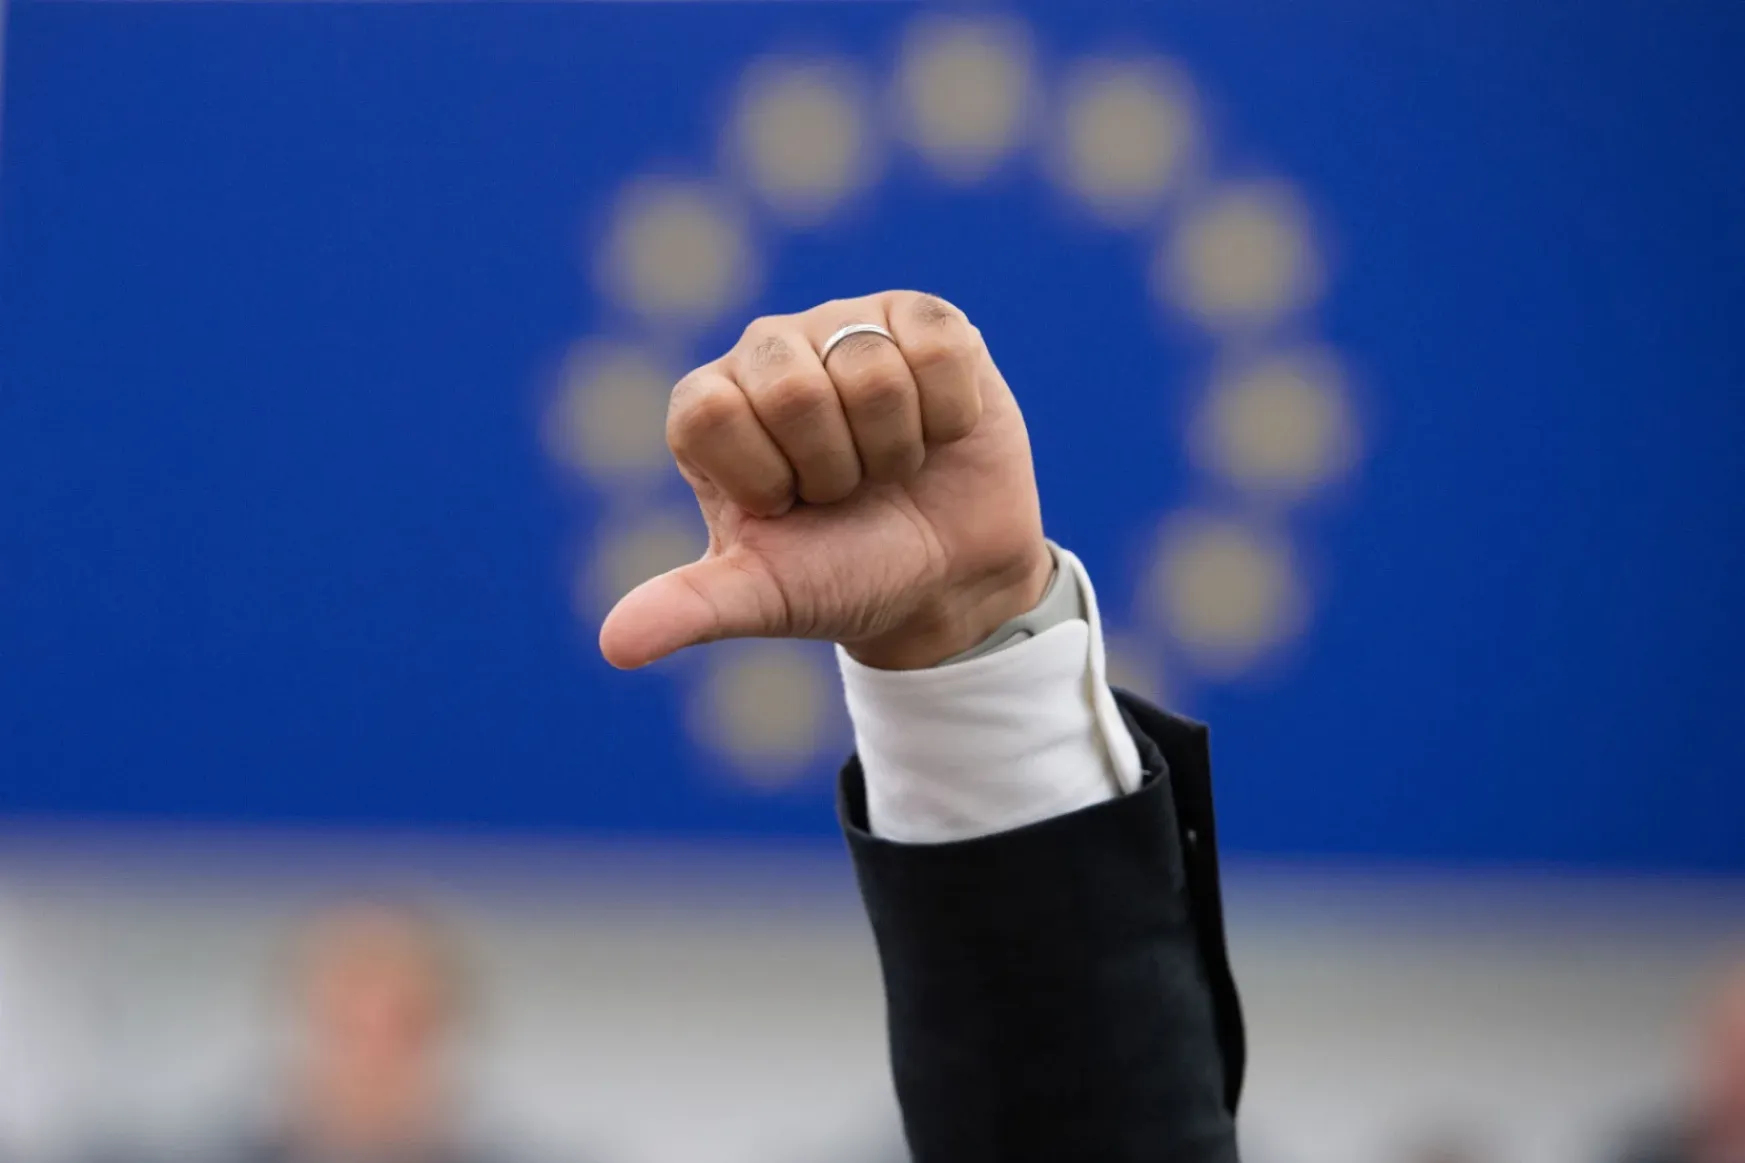 Fidesz reactions to the EP ruling: a disregard for the free will of the Hungarian people